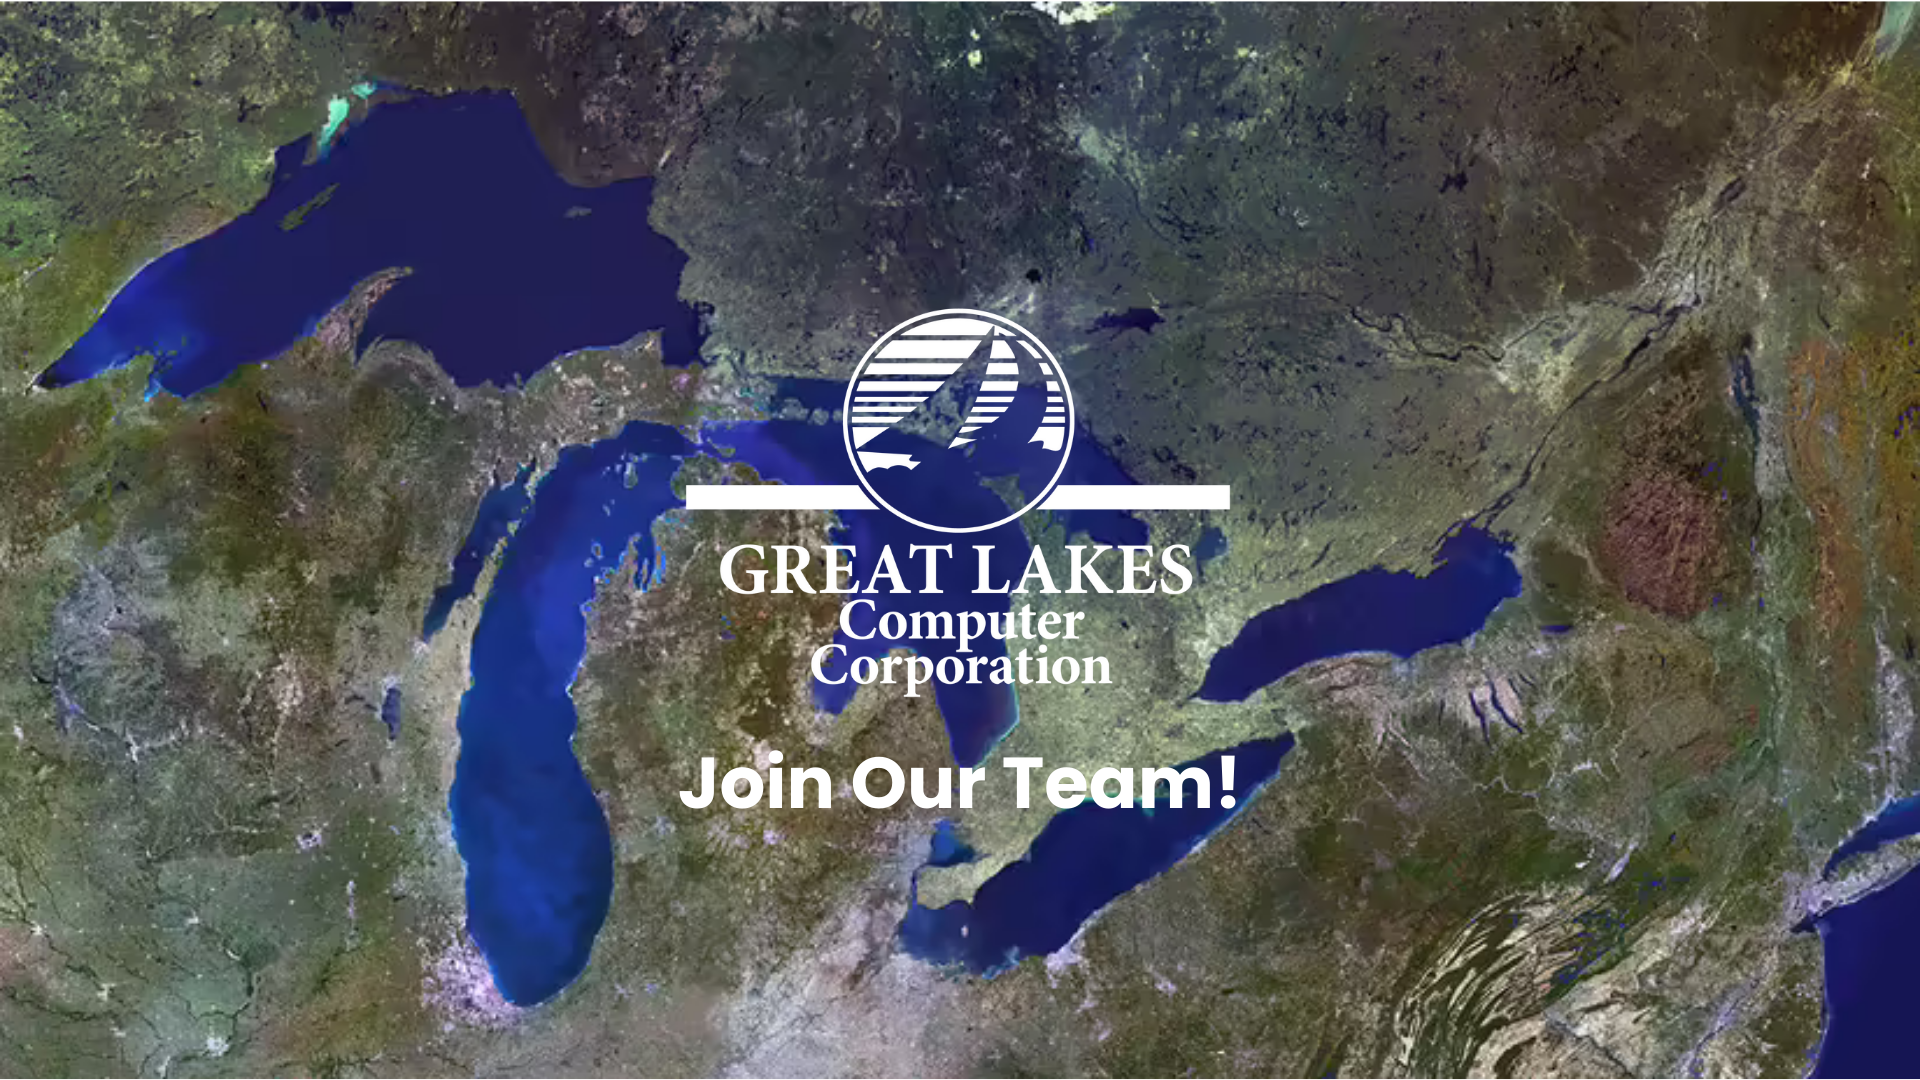 Great Lakes Computer - Join Our Team